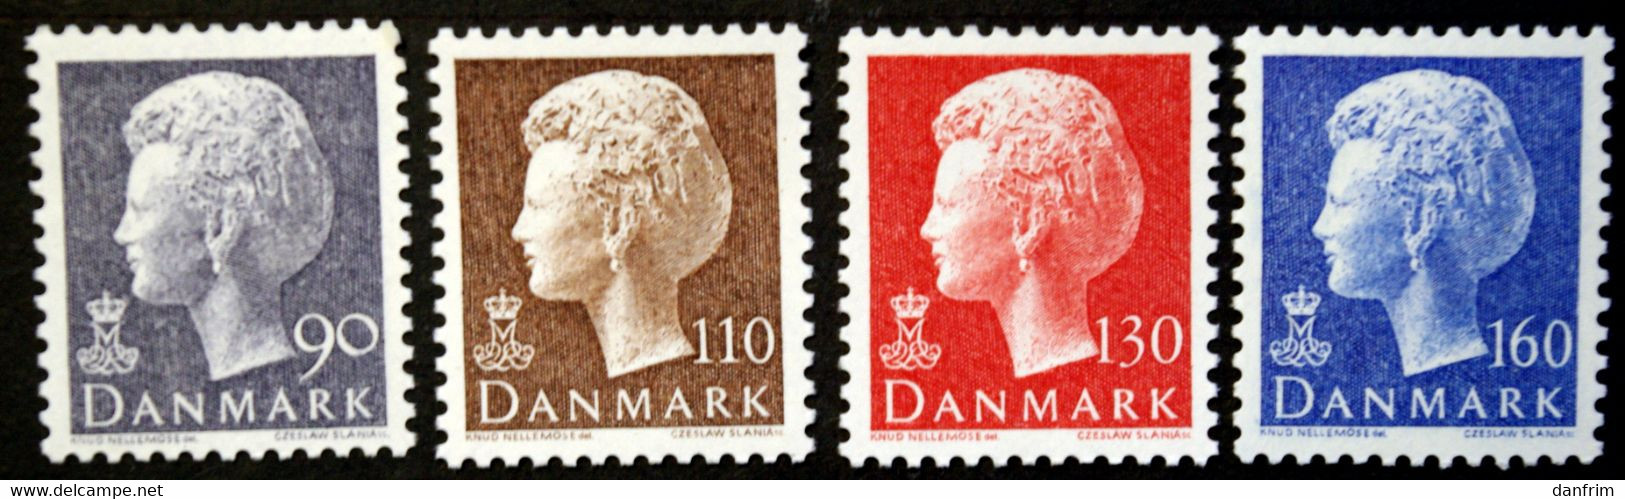 Denmark 1979   Queen Margrethe II  MiNr.680-83  MNH (**)  ( Lot  A 287) - Unused Stamps